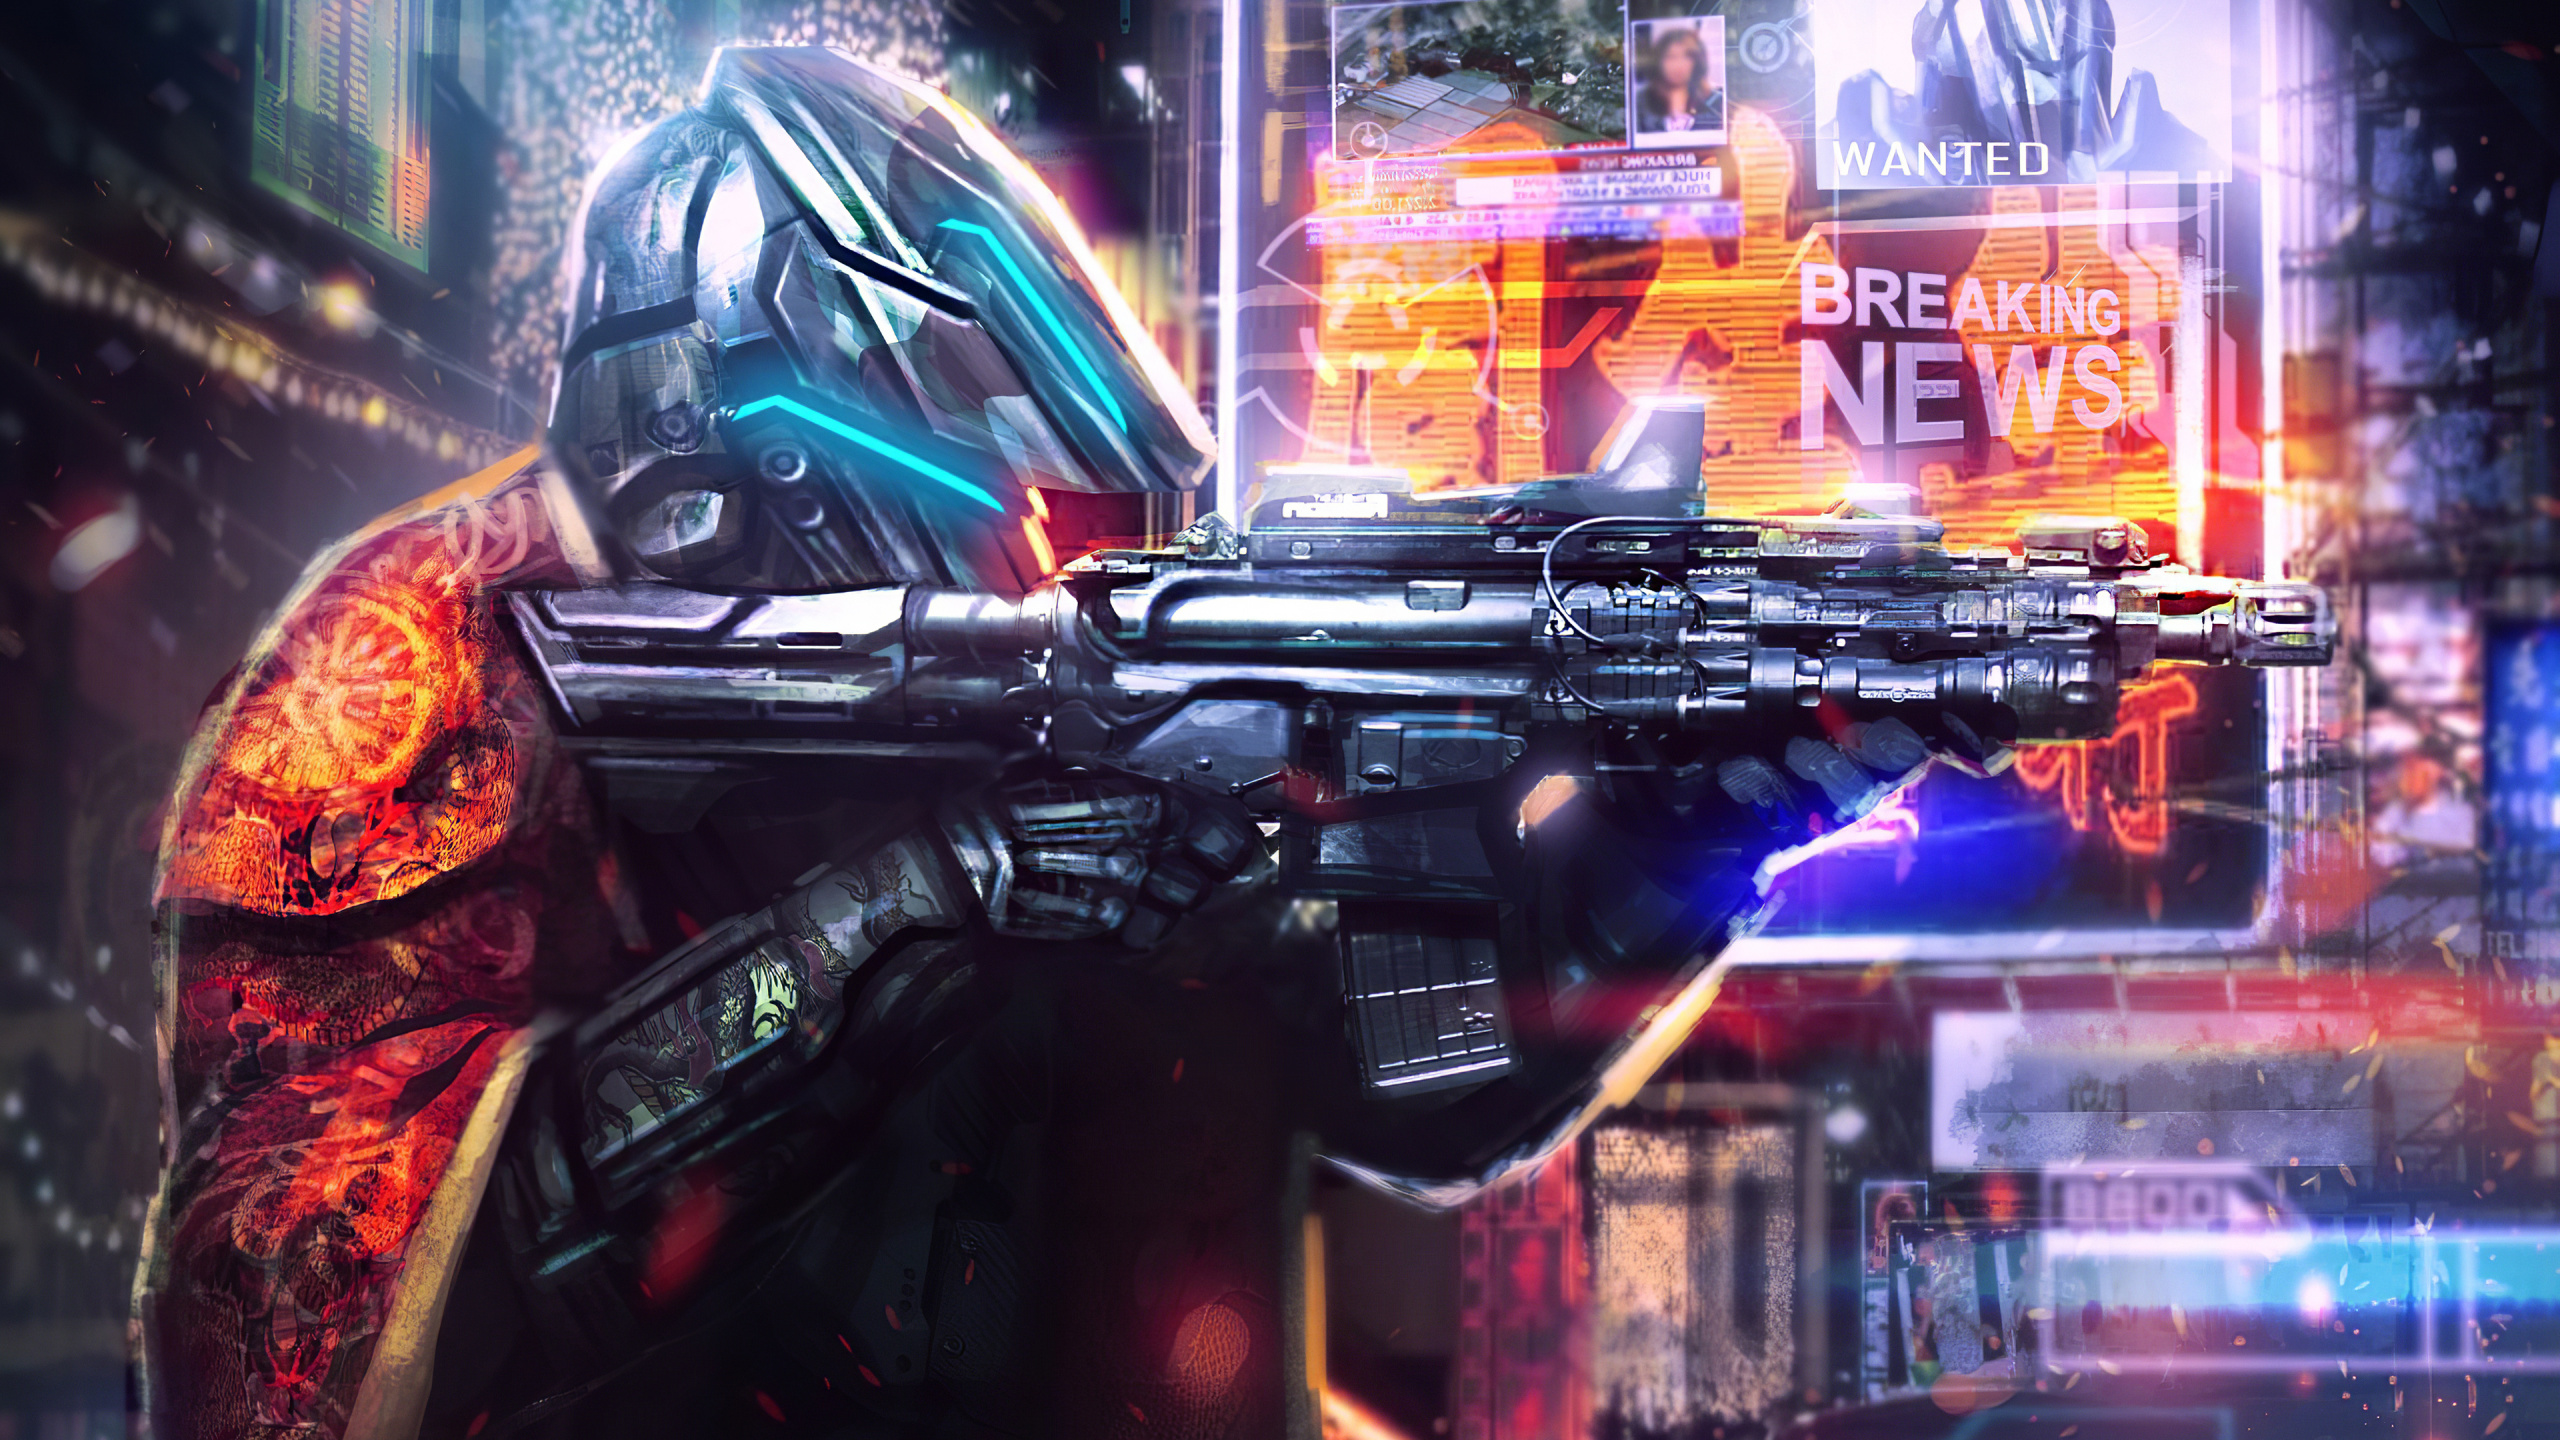 pc Game, Digital Art, Concept Art, Shooter Game, Games. Wallpaper in 2560x1440 Resolution